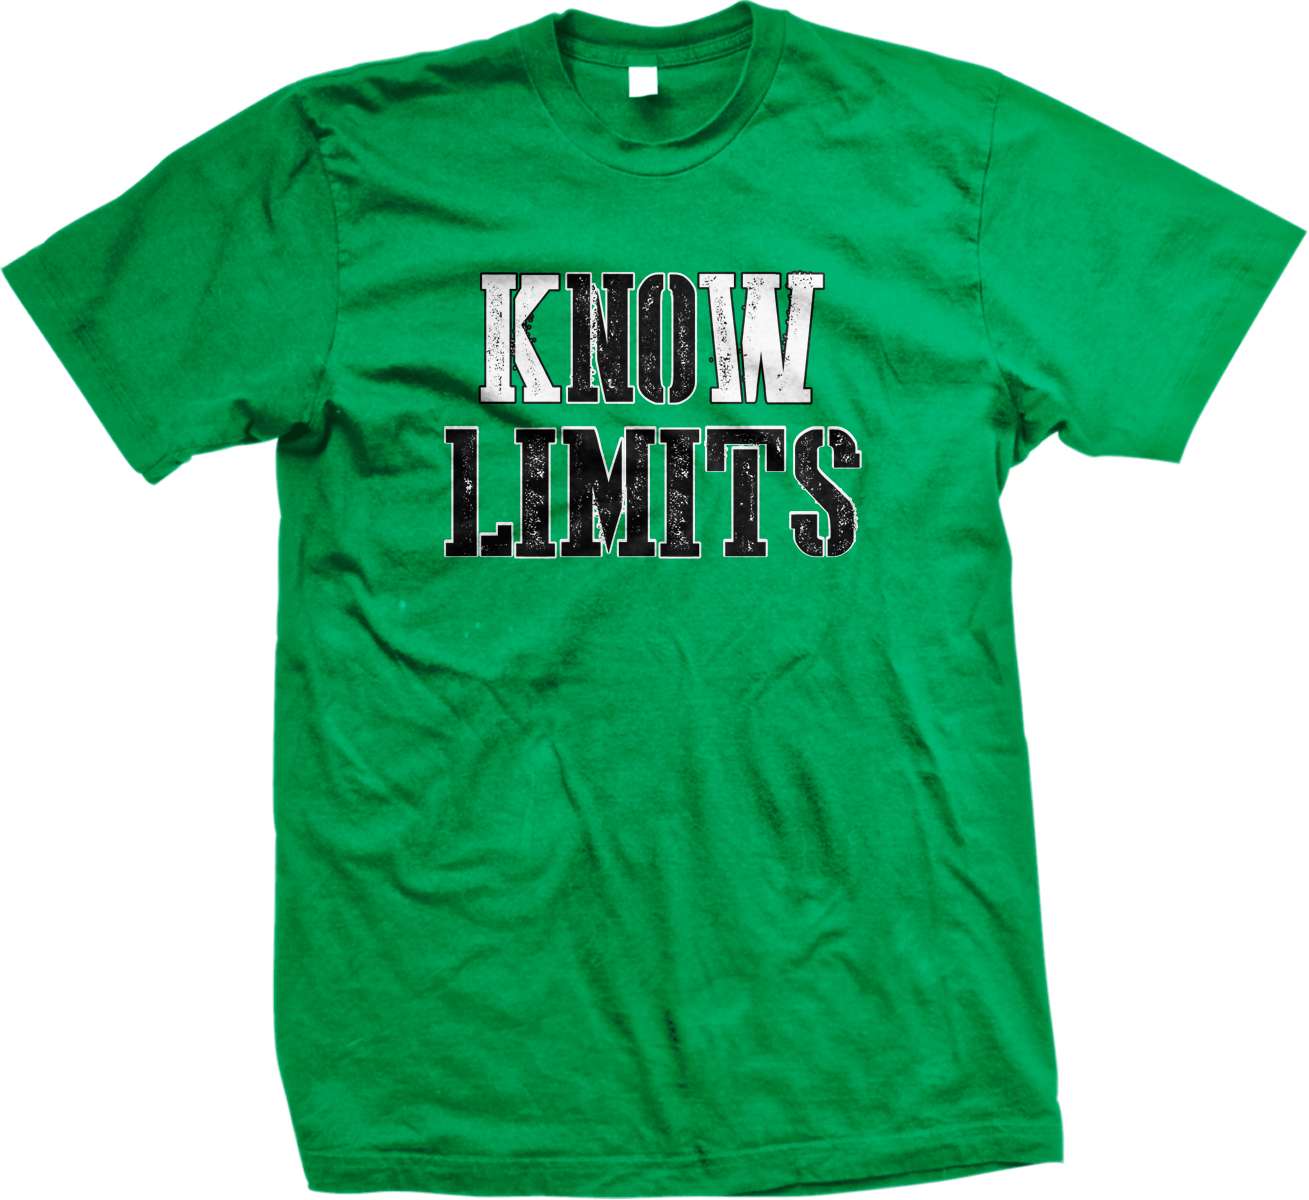 Know Limits - No Limits Challenges Sayings Slogans Mens T-shirt | eBay